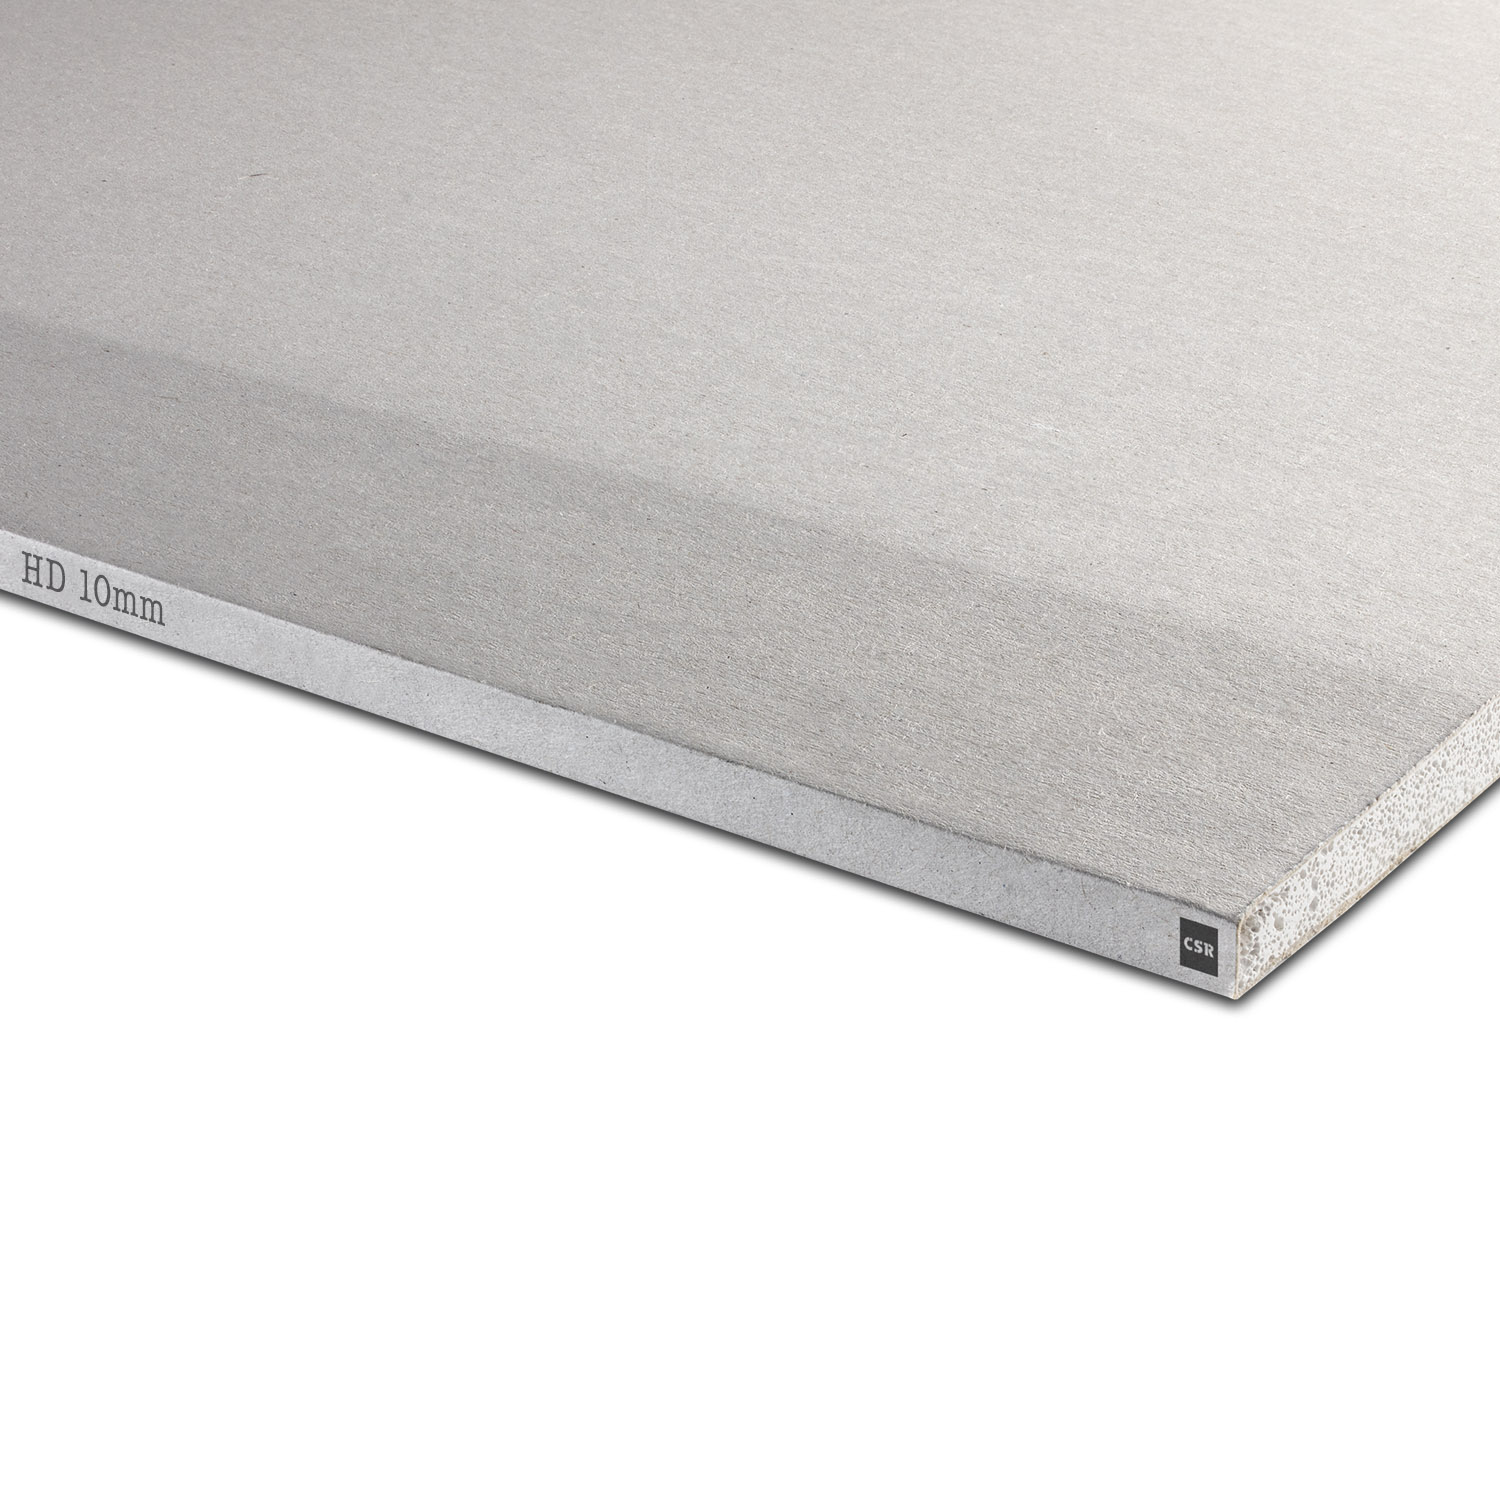 Product image of Gyprock HD plasterboard